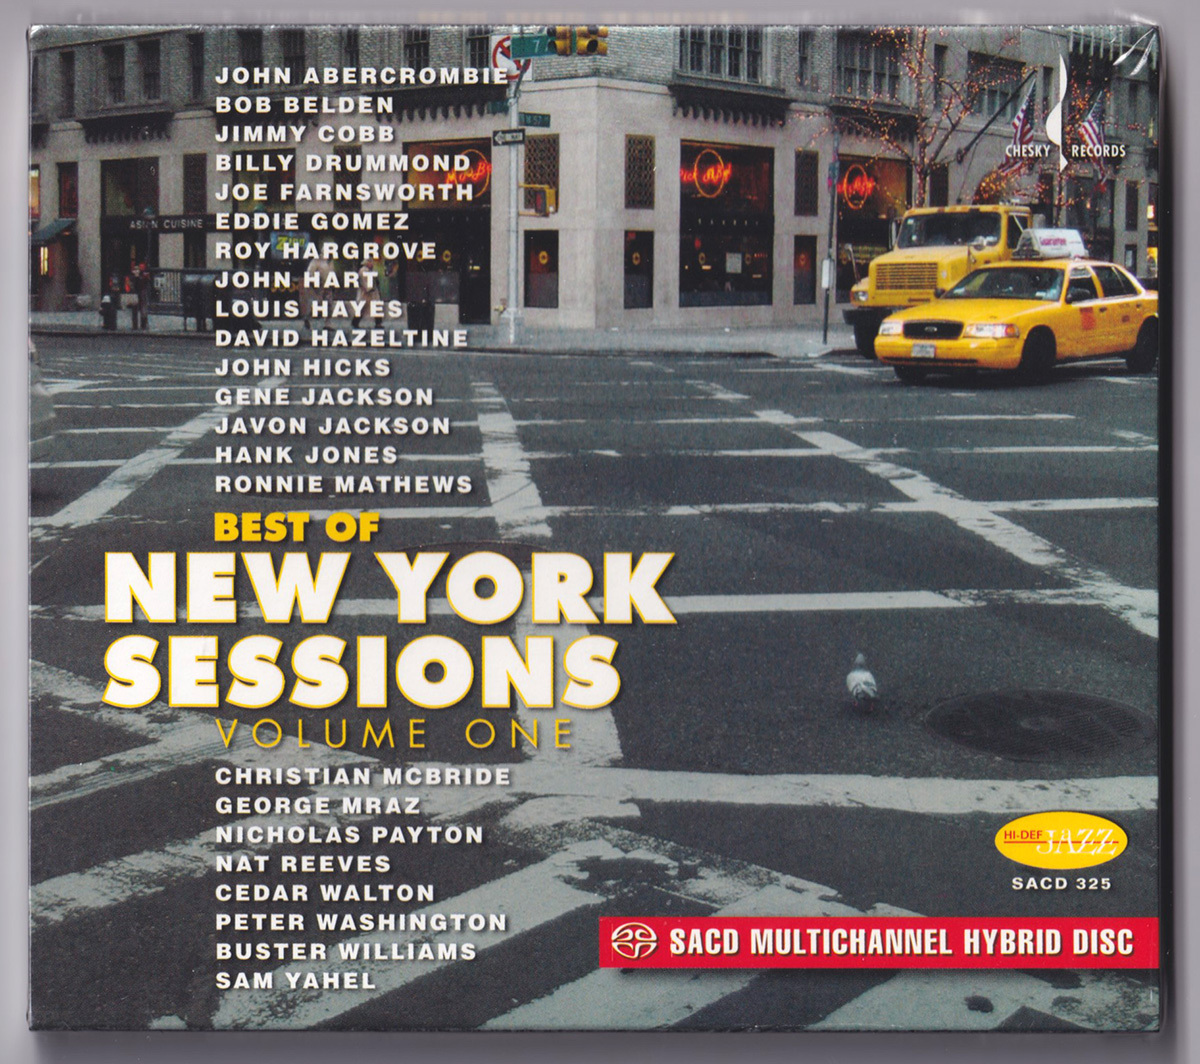 Chesky SACD325 V.A. / BEST OF NEW YORK SESSIONS Volume One che лыжи SACD